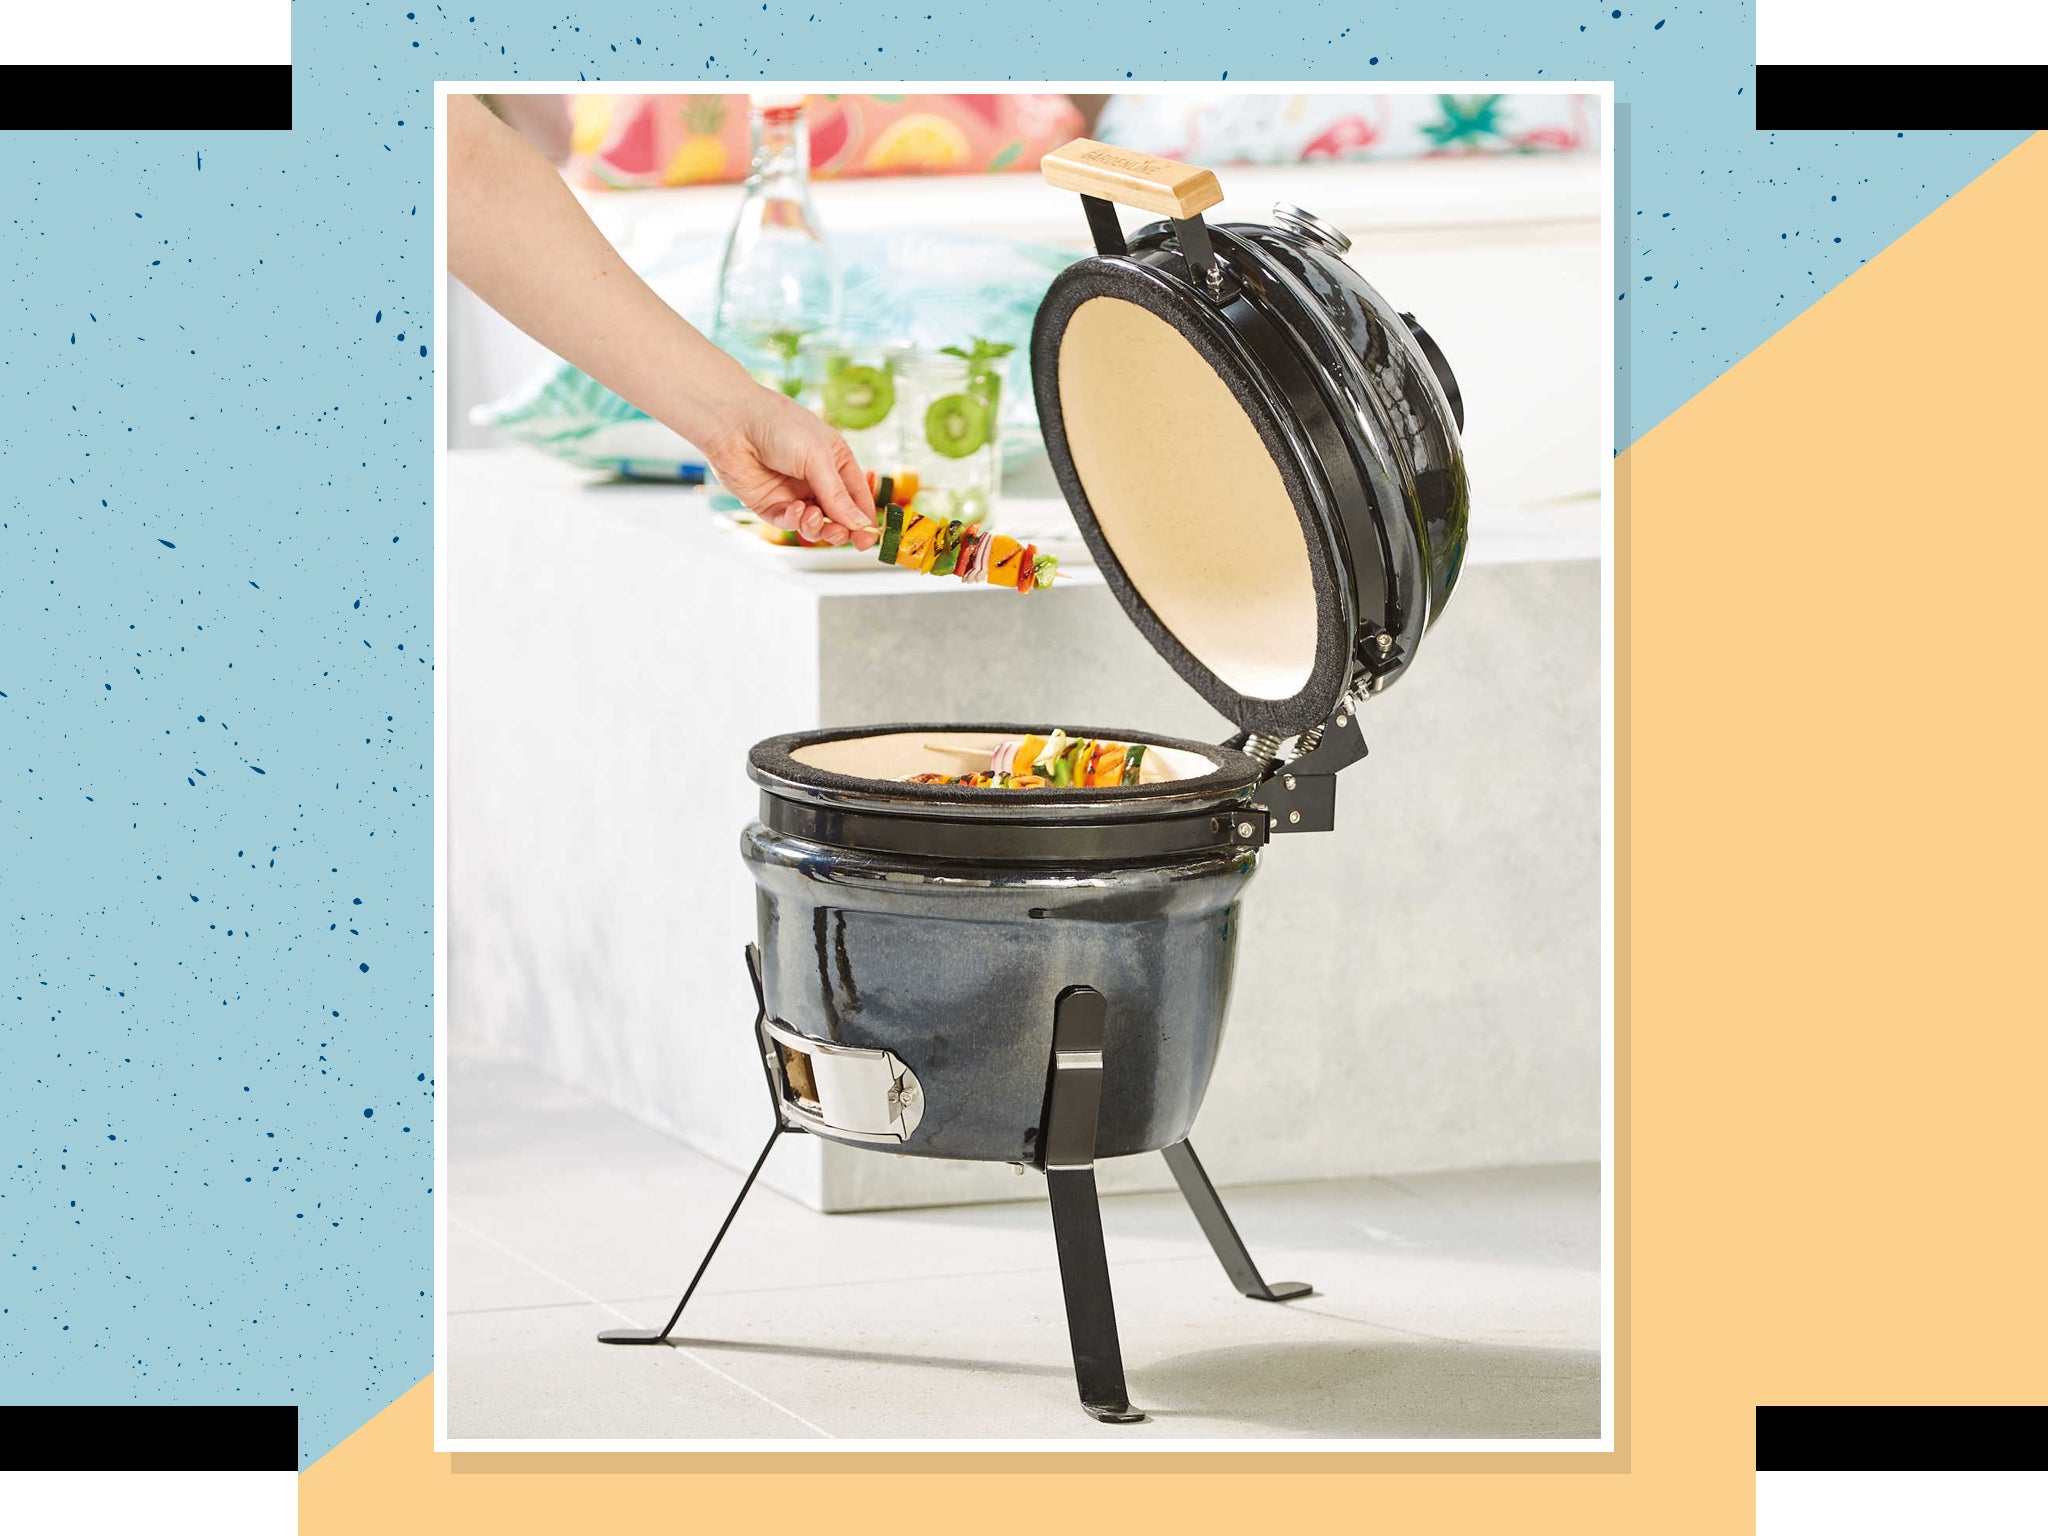 This pint-sized barbecue is compact enough for any garden space